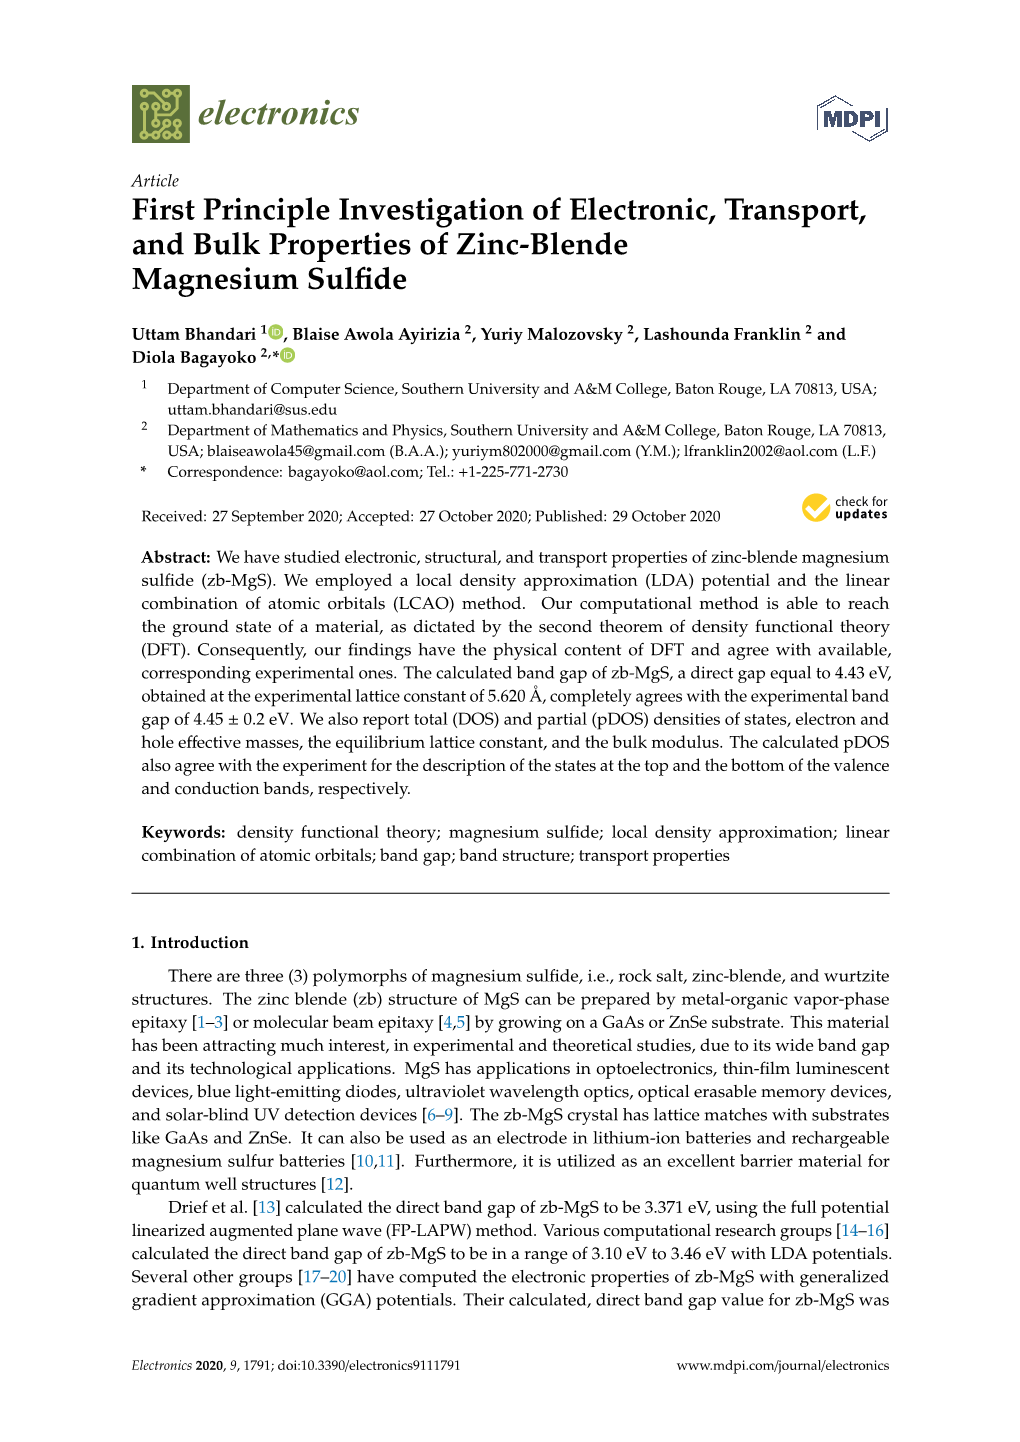 First Principle Investigation of Electronic, Transport, and Bulk Properties of Zinc-Blende Magnesium Sulﬁde